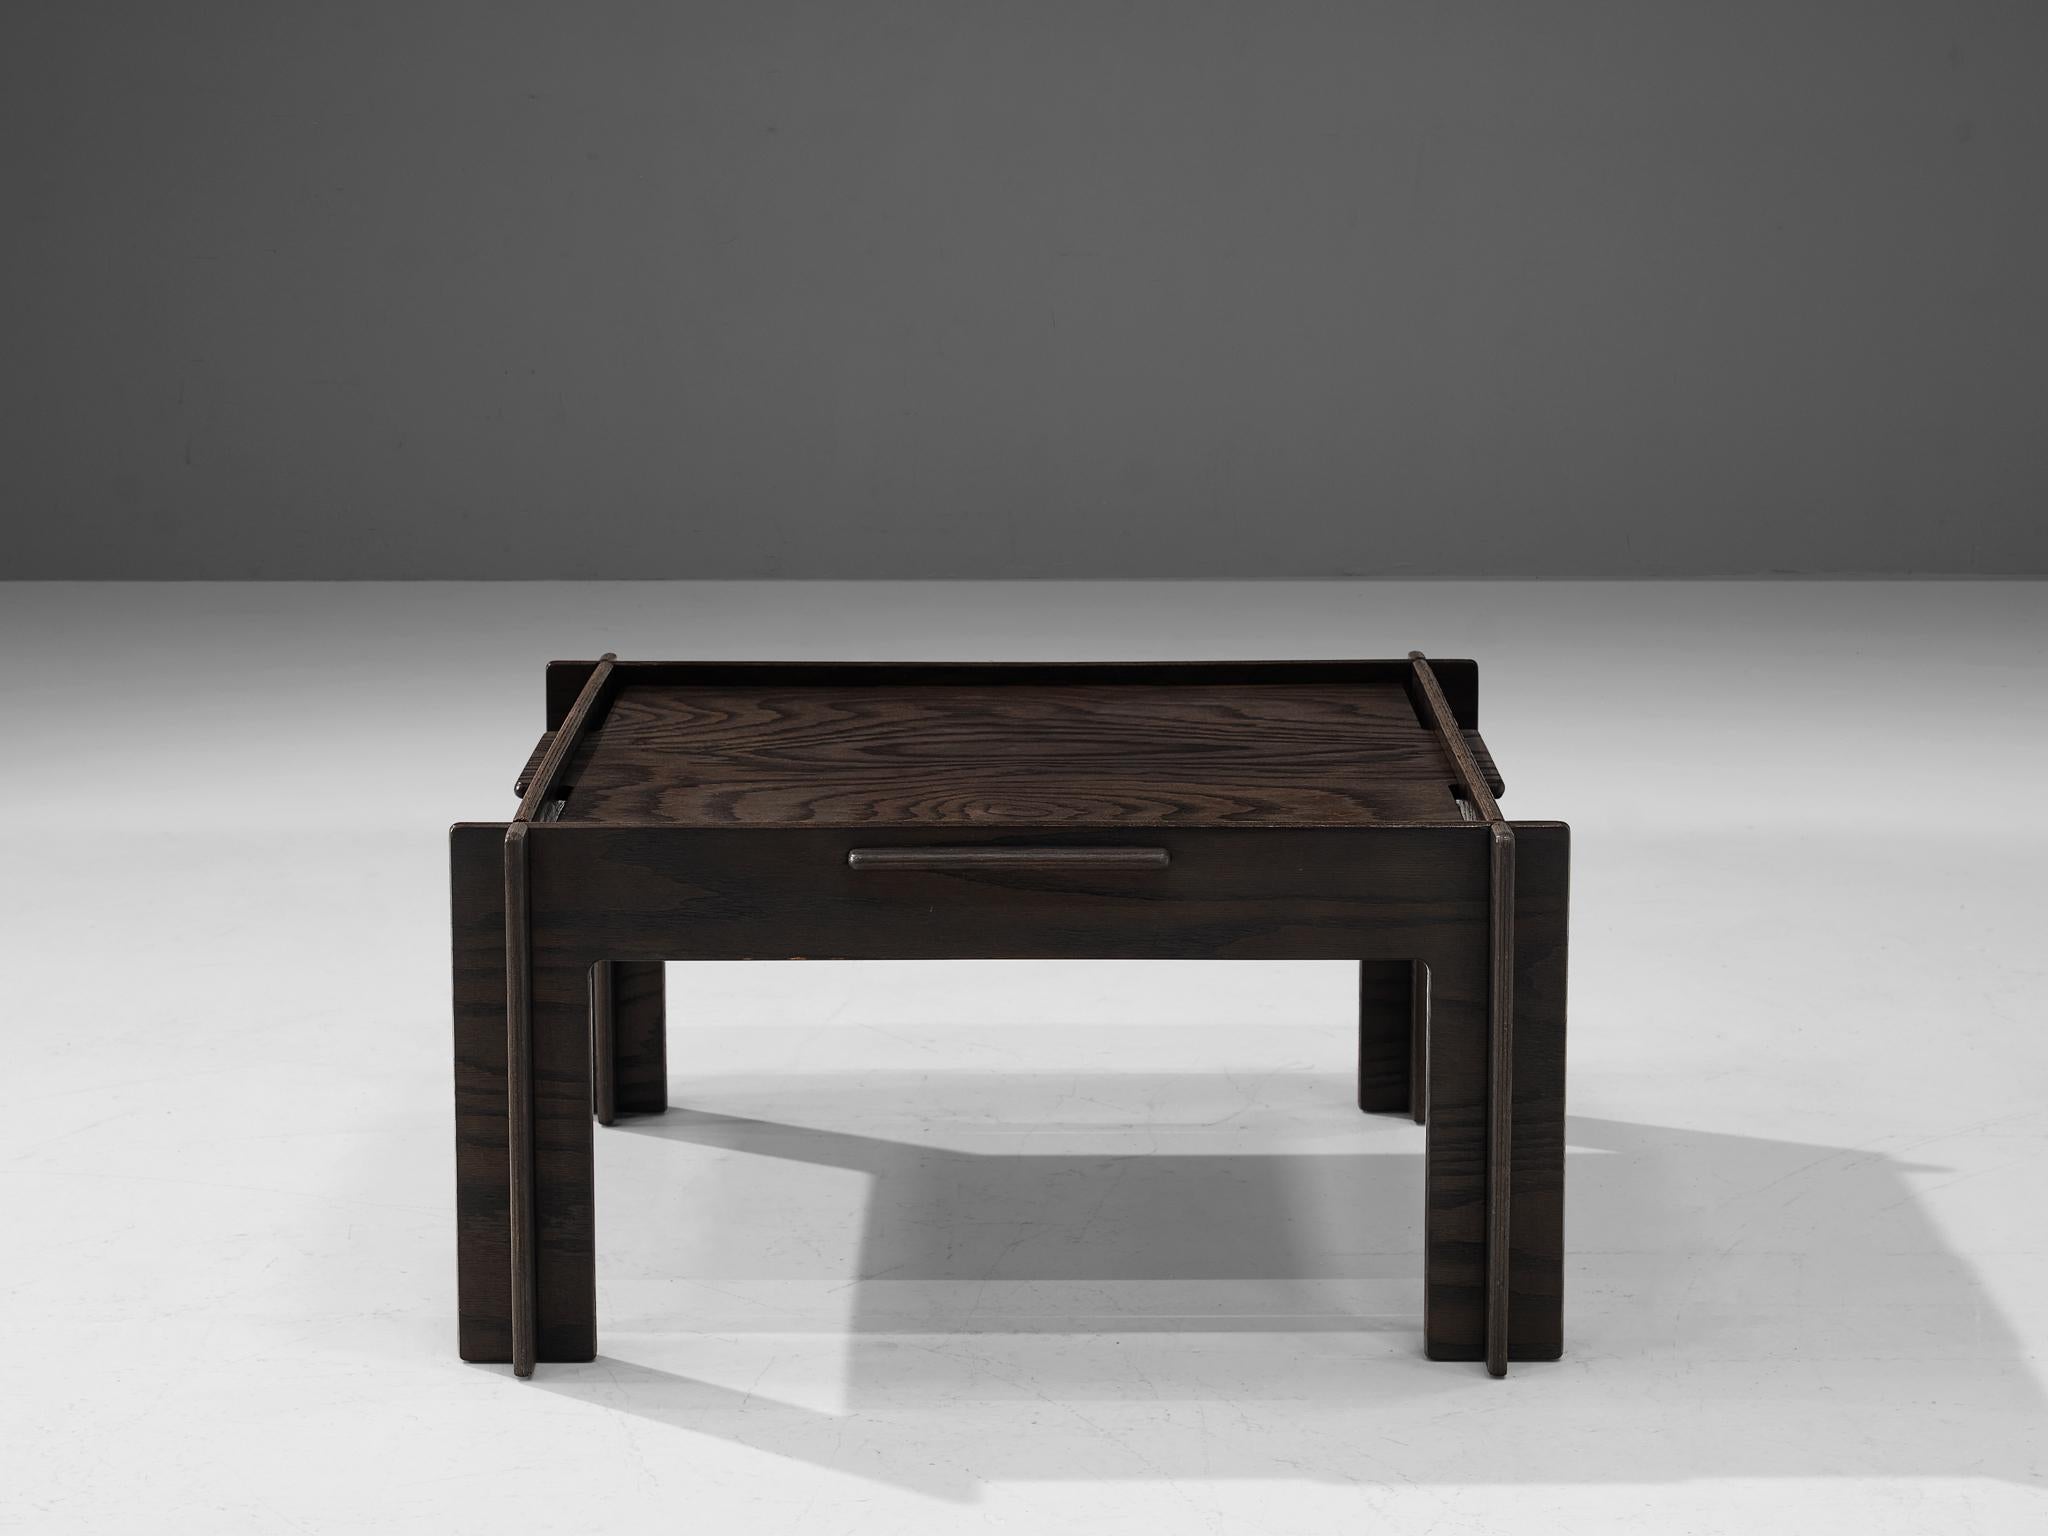 Arne Jacobsen for Asko, coffee table, model 'Rover', plywood, Denmark, 1968. 

Stunning, small coffee table designed by Arne Jacobsen for Asko. The coffee table has a sculptural, almost architectural look. This is mainly achieved by the legs that